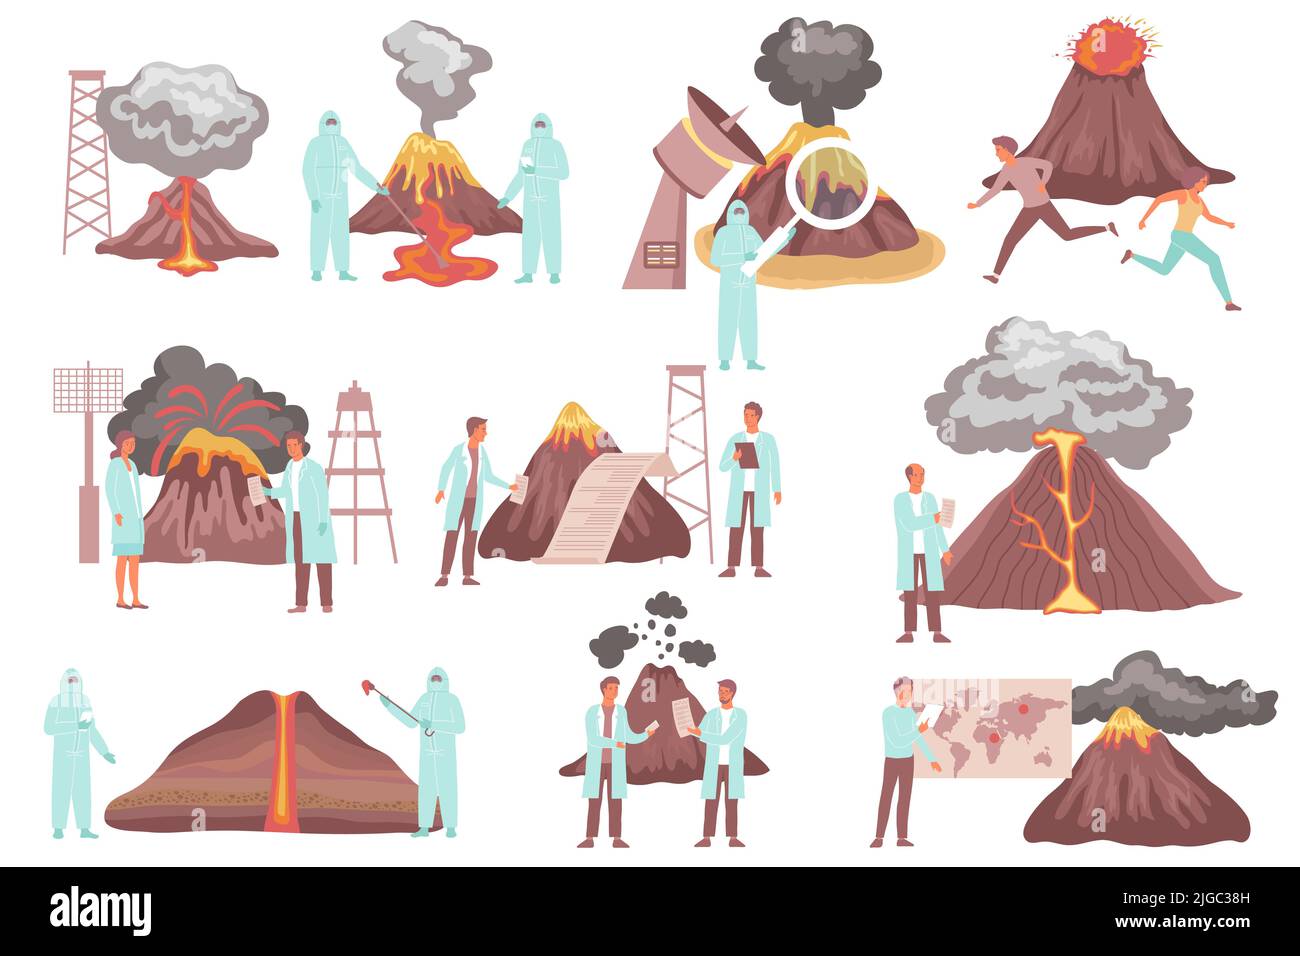 Volcano people science flat set of isolated icons human characters of scientists with equipment analyzing eruptions vector illustration Stock Vector